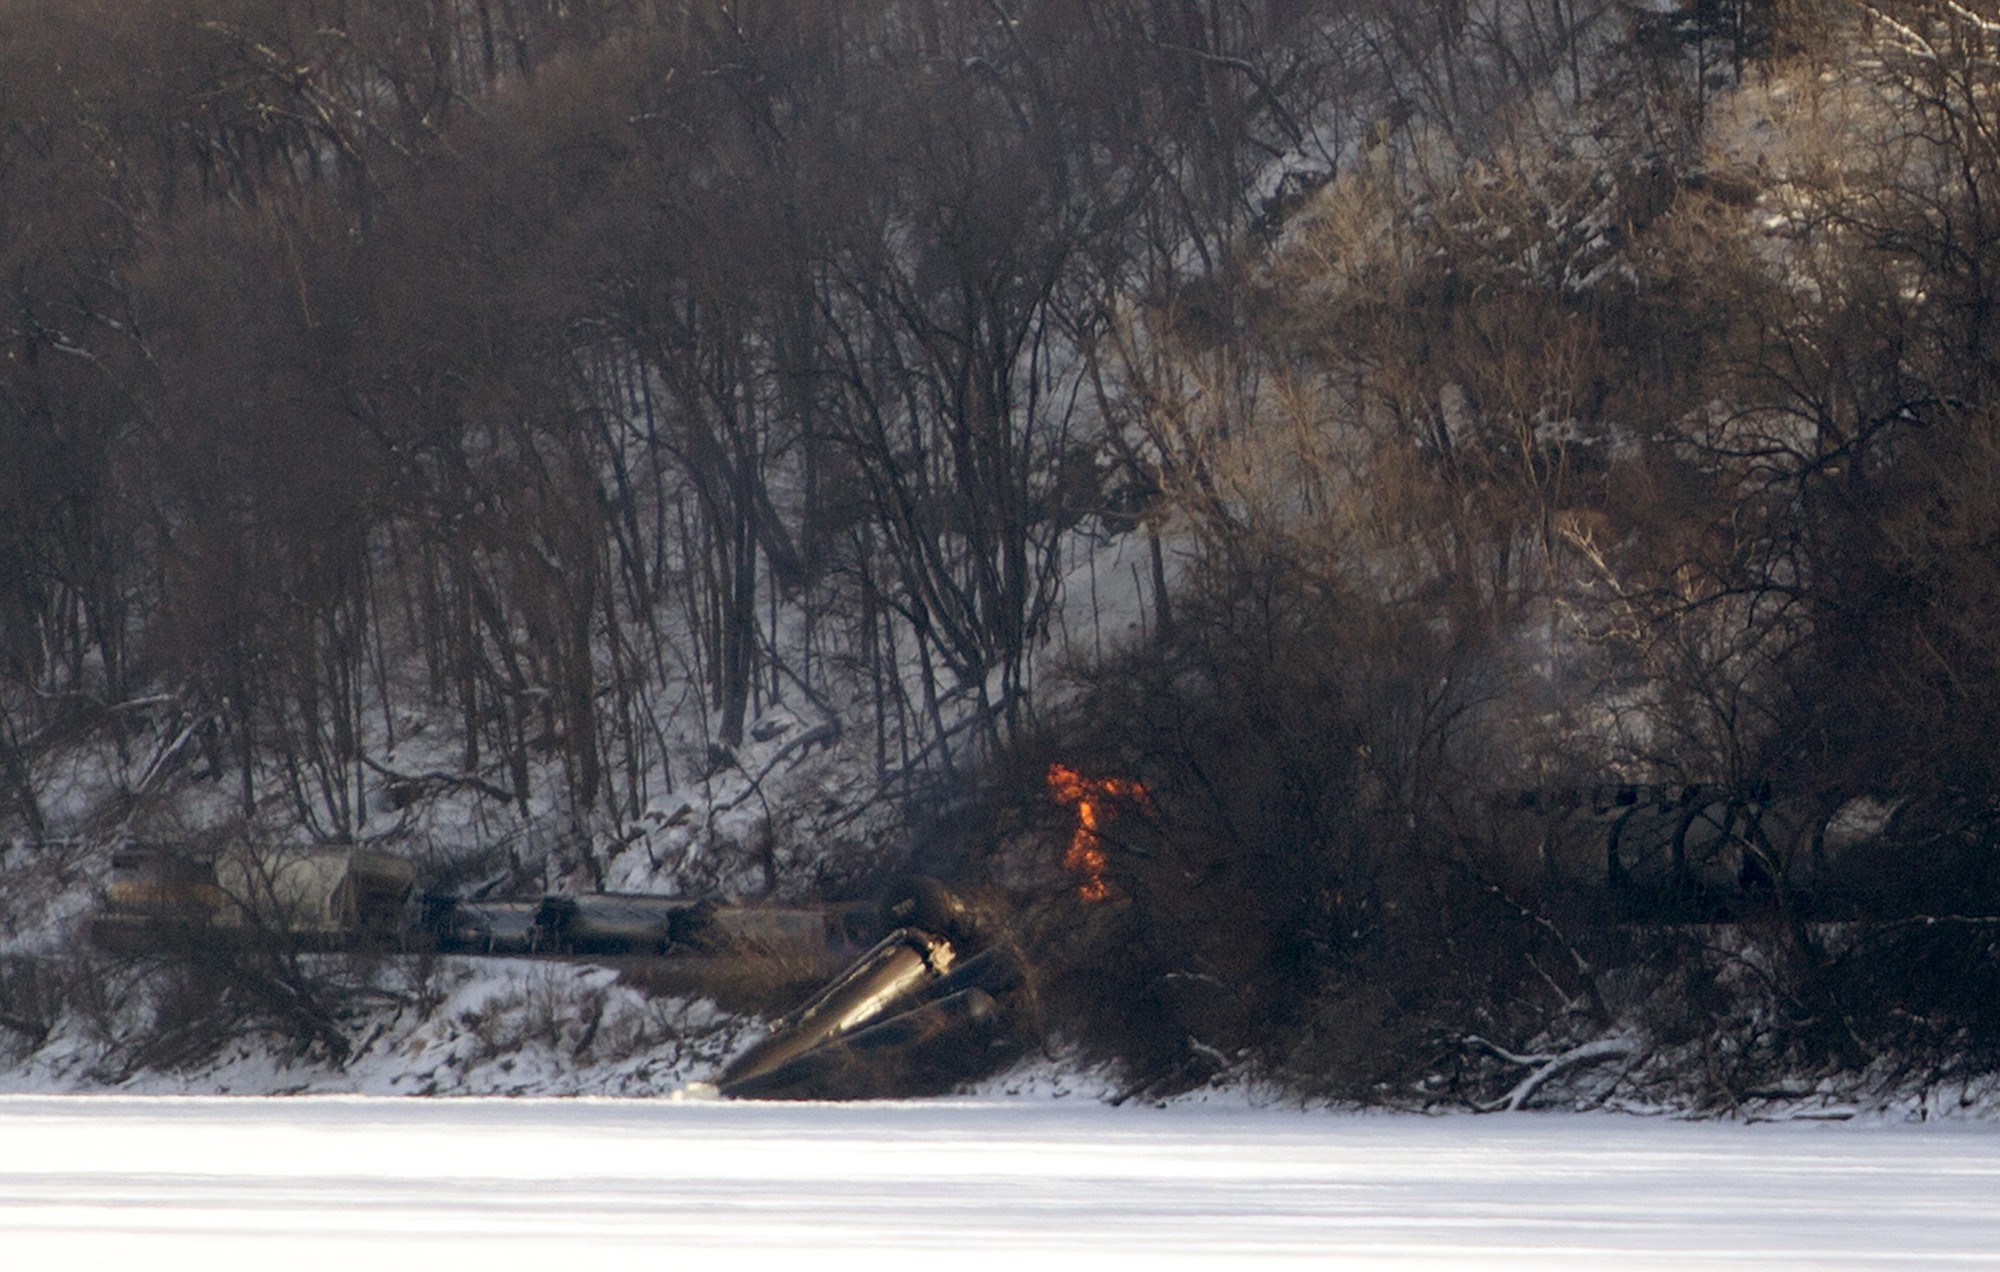 Mike Burley/Dubuque Telegraph Herald
Three railcars caught fire and another three plunged into the Mississippi River on Wednesday, north of Dubuque, Iowa. In all, 11 cars derailed; 10 of them were carrying ethanol.